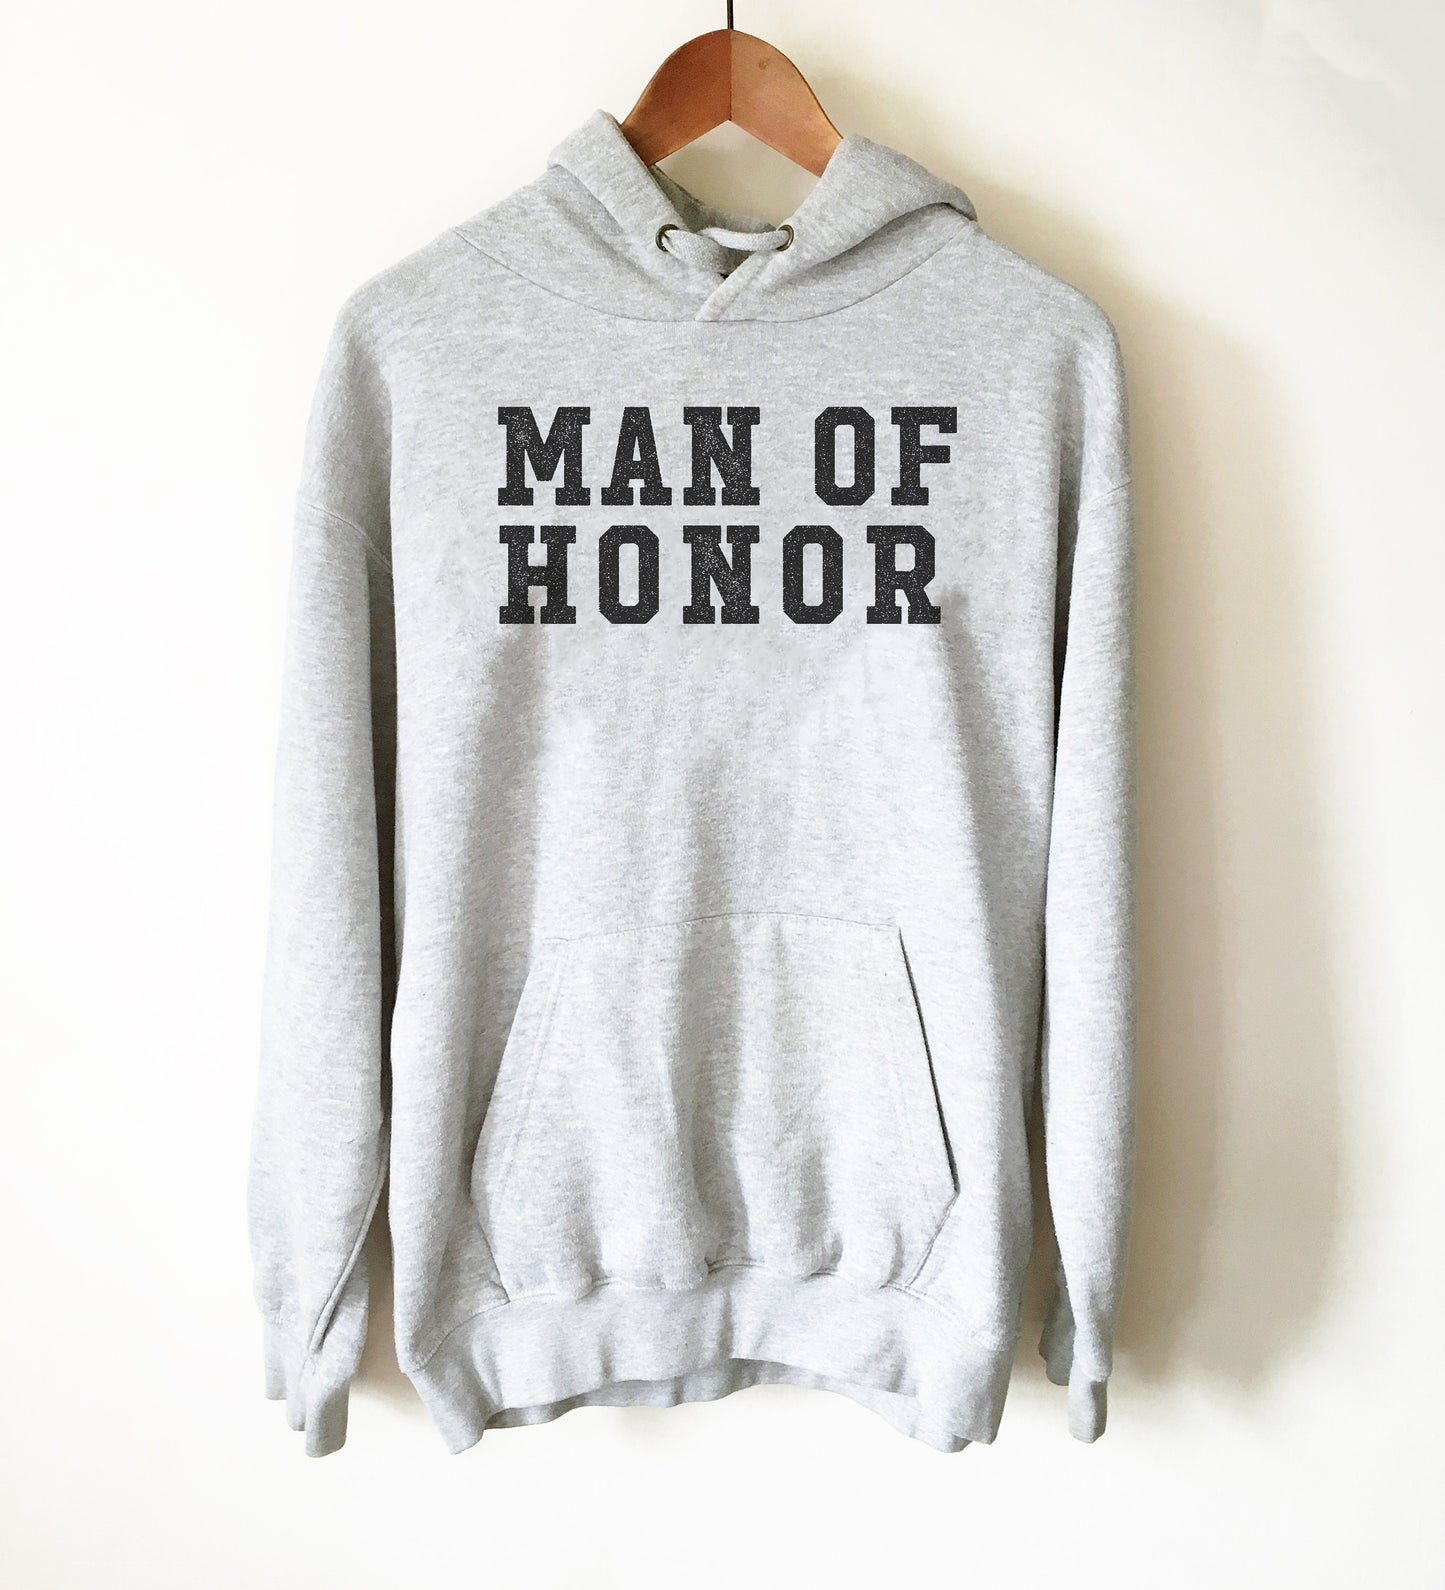 Man Of Honor Hoodie - Best Man Shirt, Bachelor Party Shirt, Wedding Party,  Grooms Party, Best Man Gift, Wedding Ceremony, Best Buddy